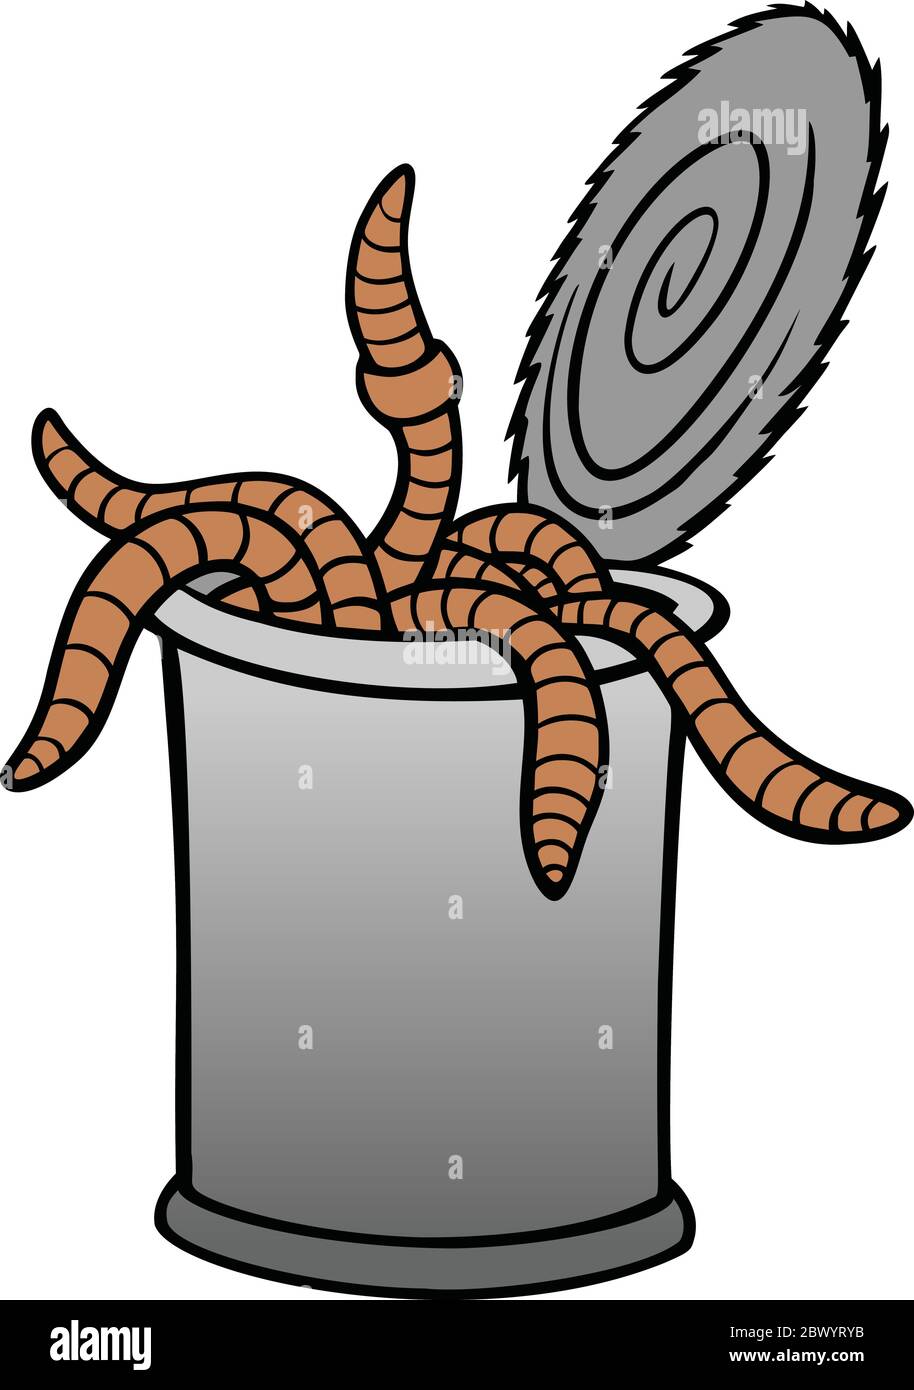 Can of Worms- An Illustration of a Can of Worms. Stock Vector